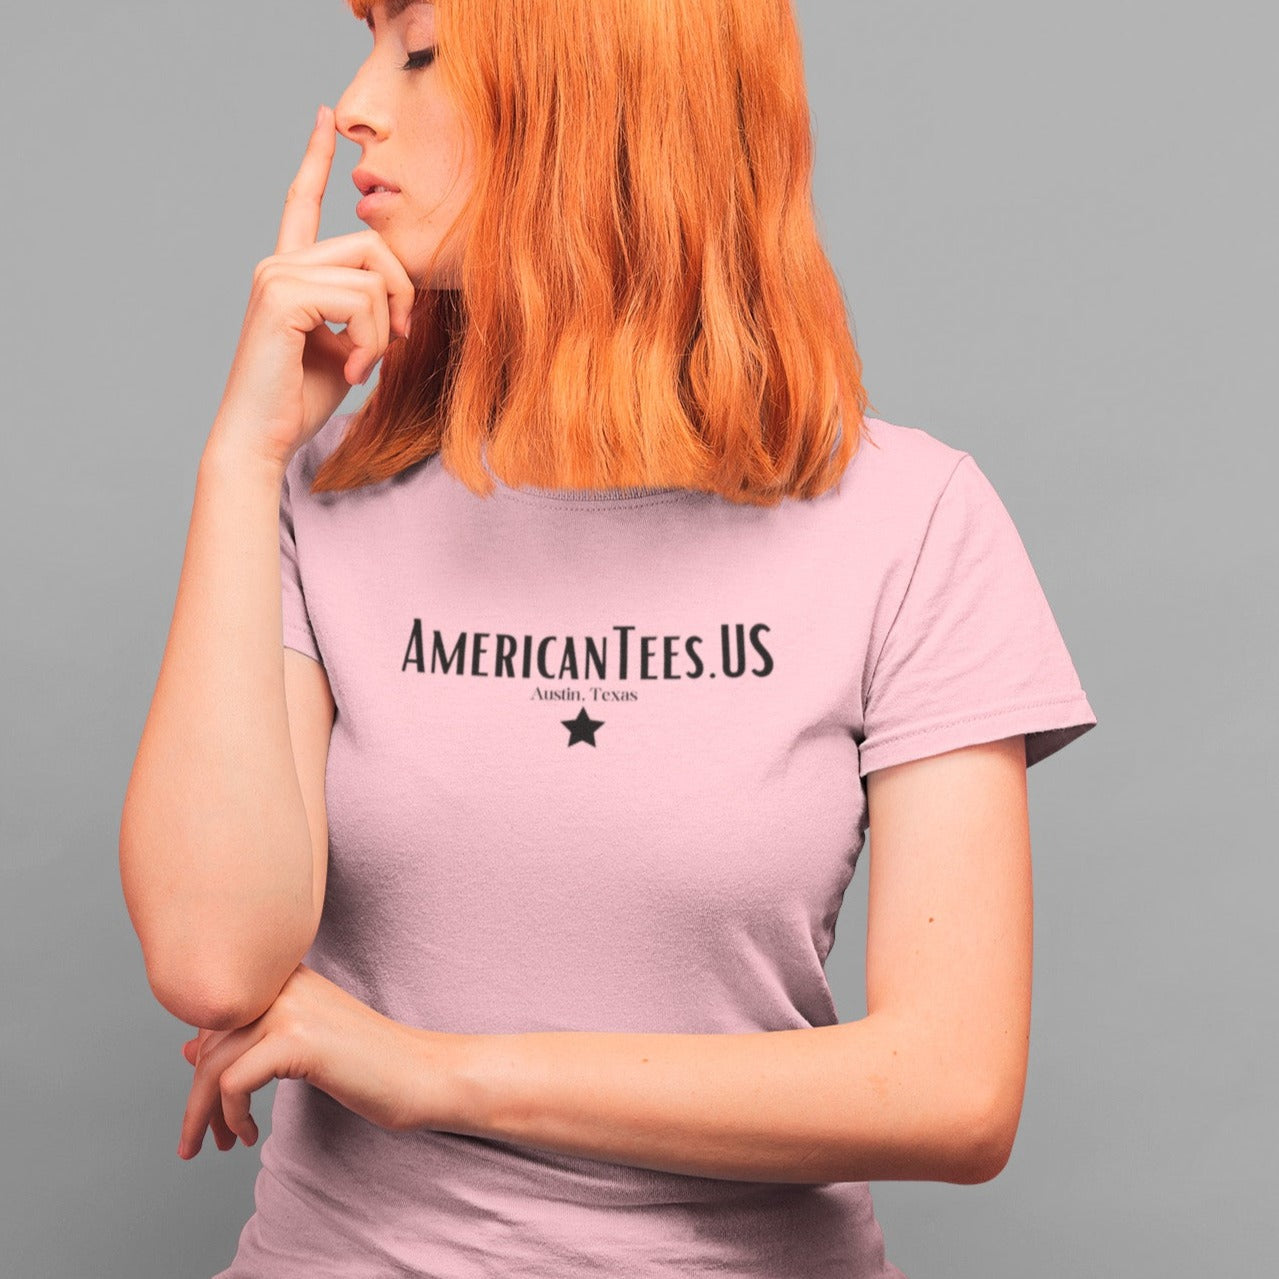 americantees-us-austin-tx-pink-t-shirt-unisex-round-neck-tee-mockup-of-a-redhead-girl-touching-her-nose